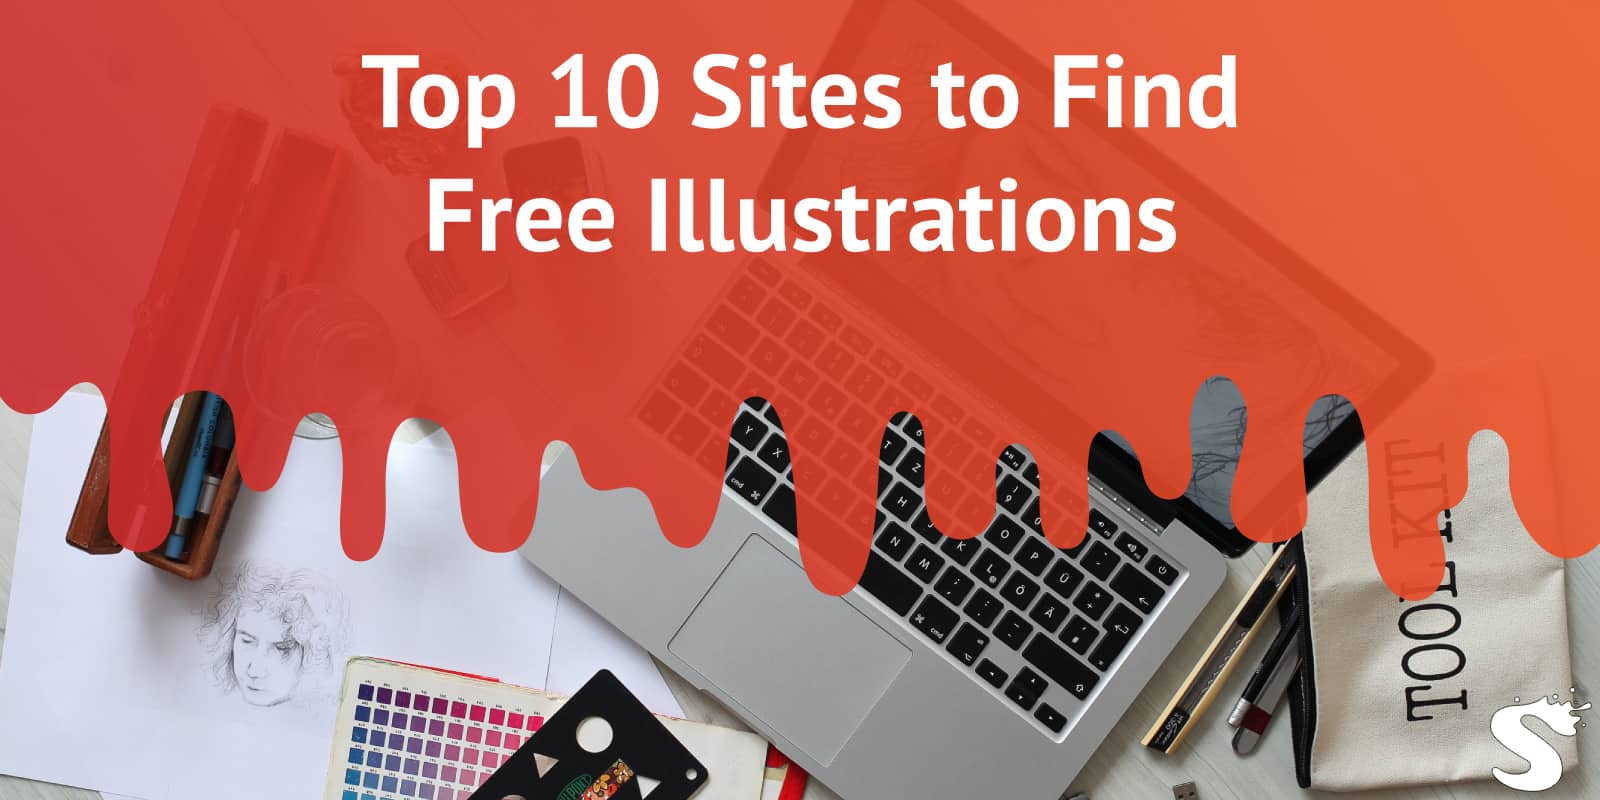 Sites With Free Illustrations